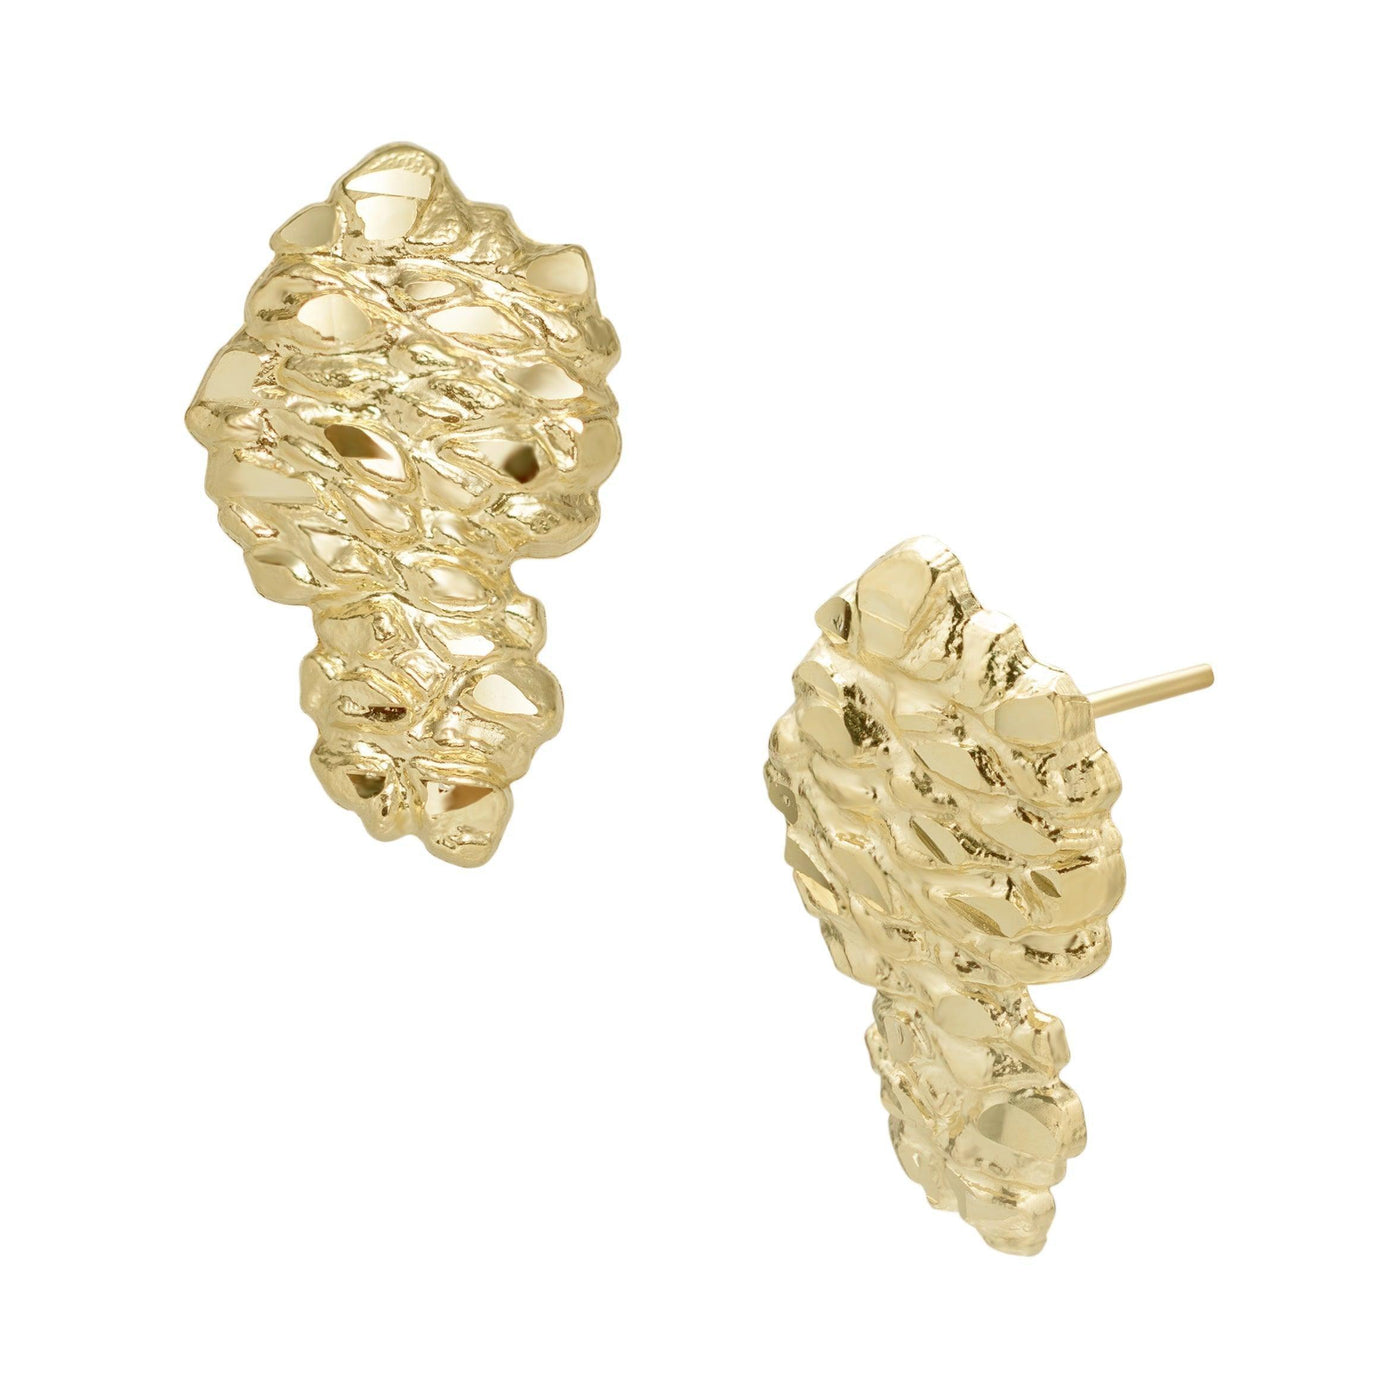 1" Large Textured Nugget Stud Earrings 10K Yellow Gold - bayamjewelry